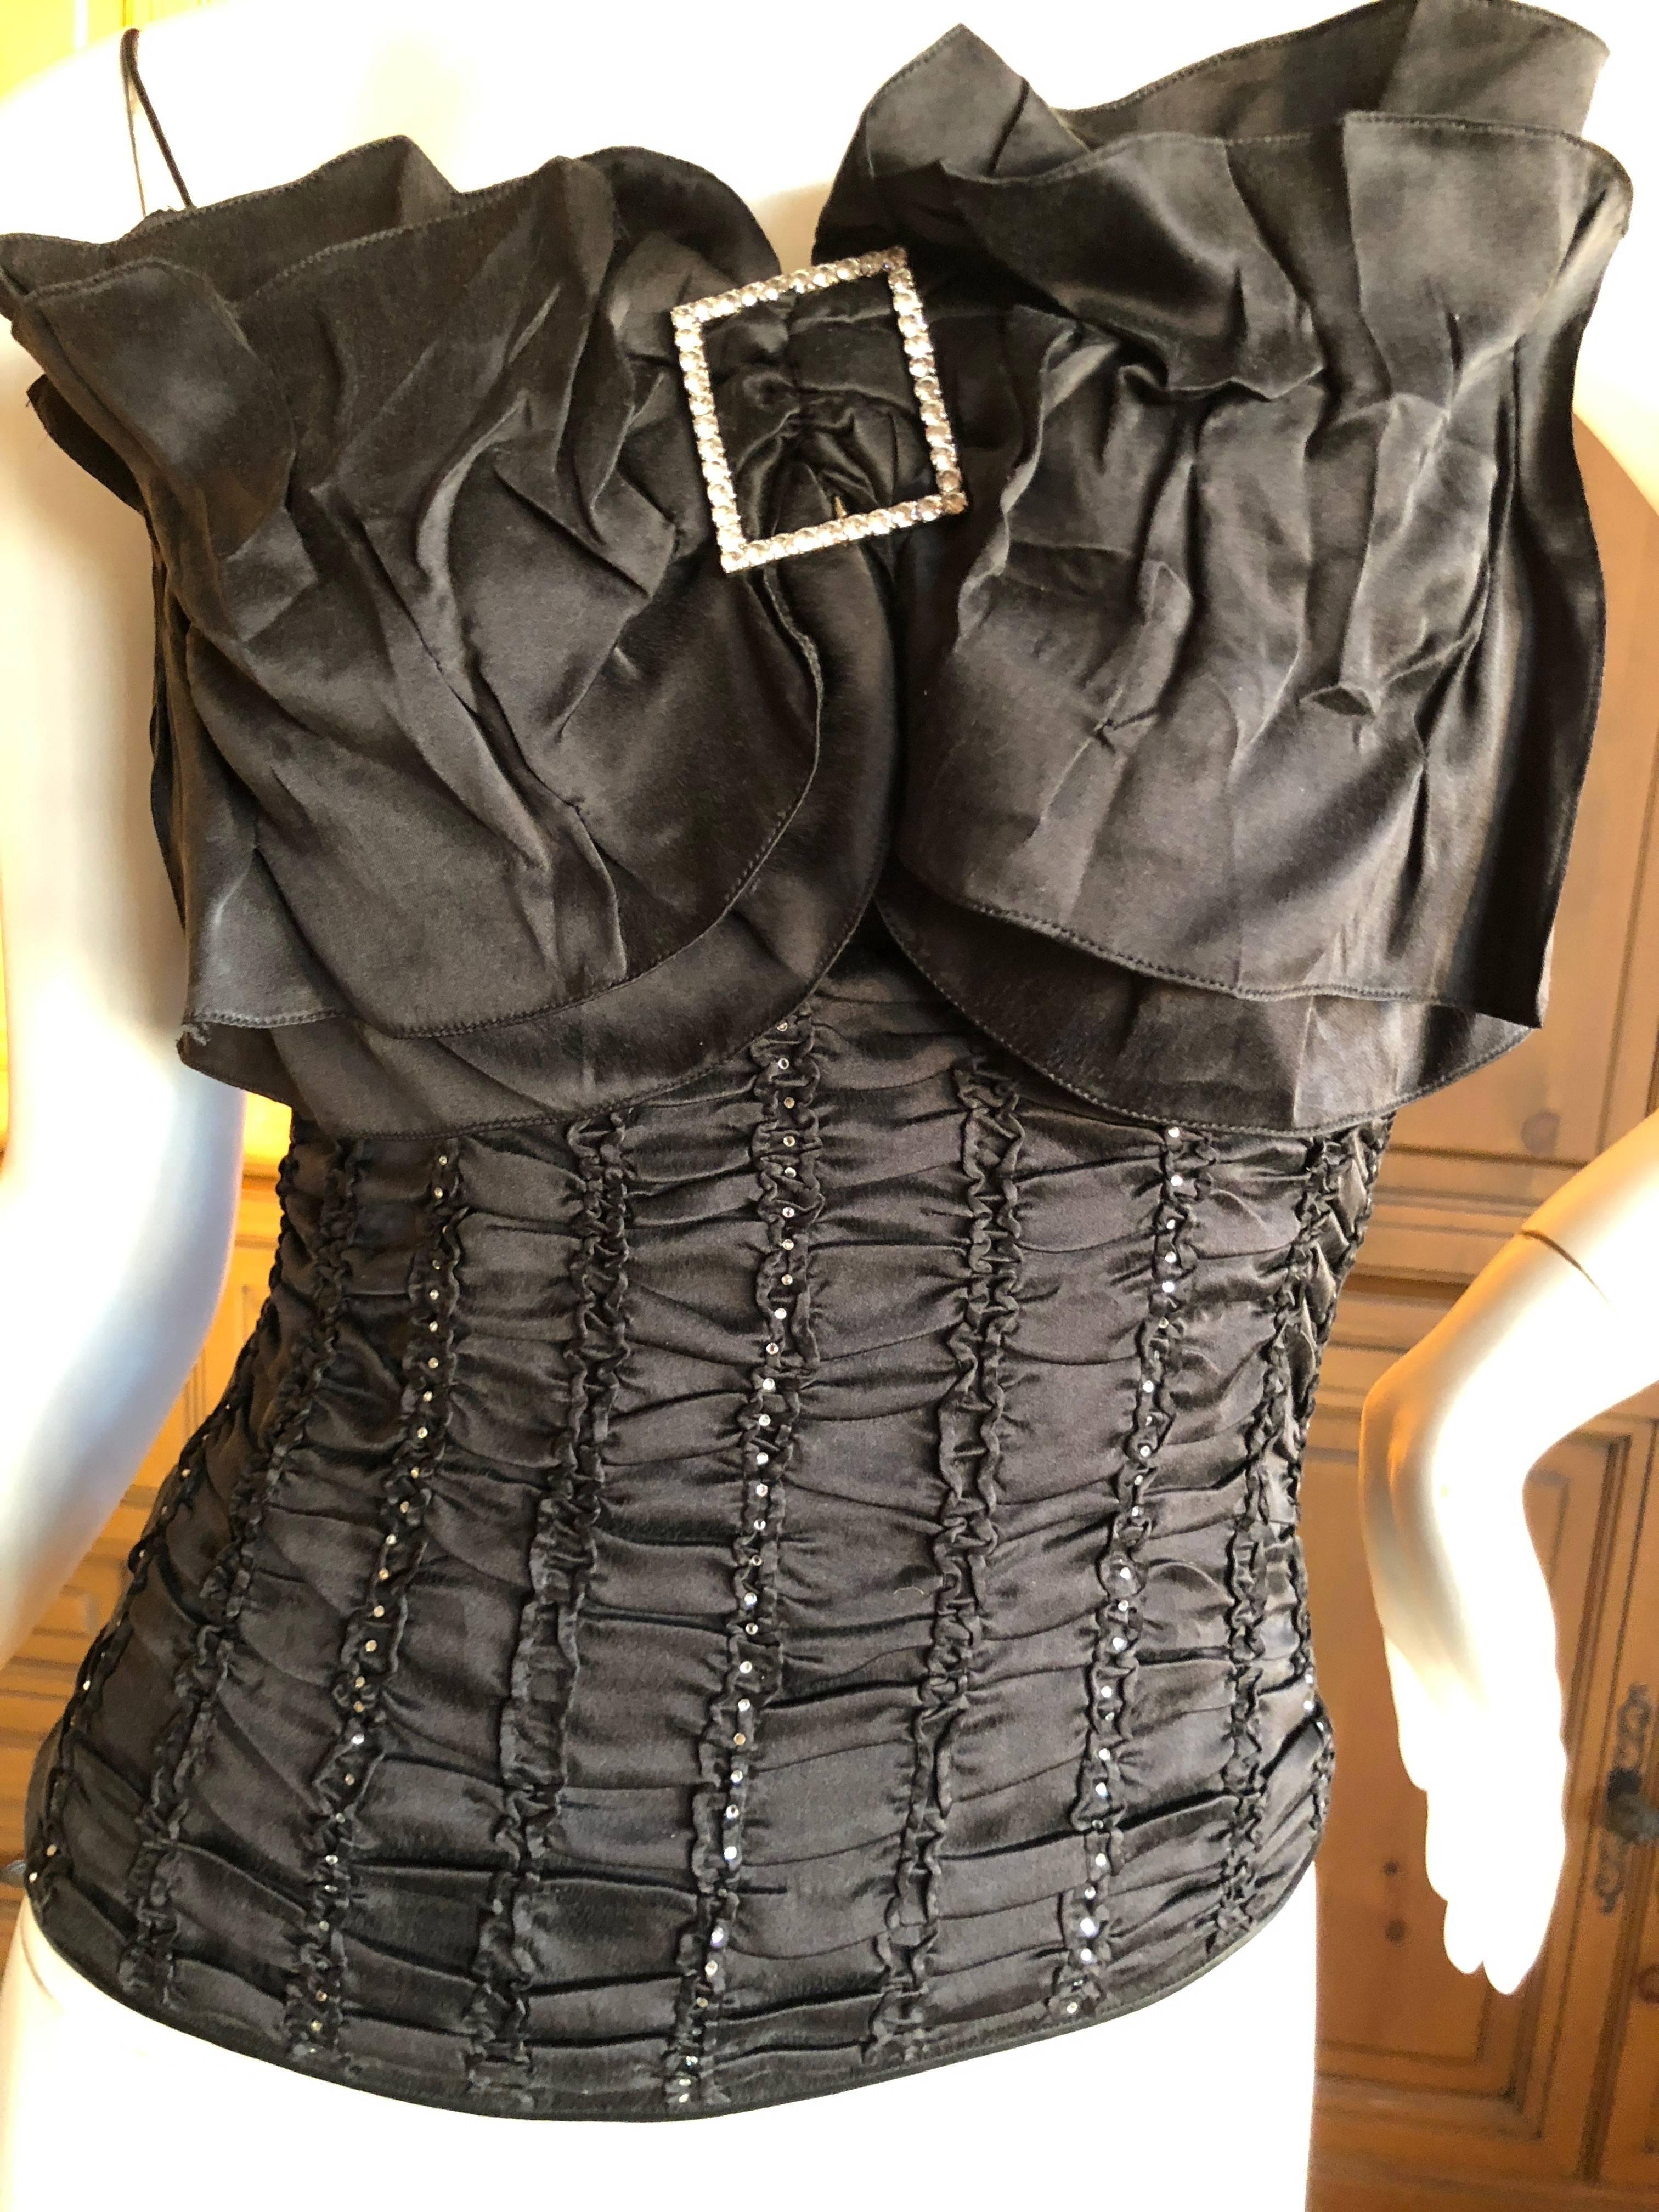  John Galliano Vintage Crystal Embellished Black Silk Top with Exaggerated Bow In Excellent Condition For Sale In Cloverdale, CA